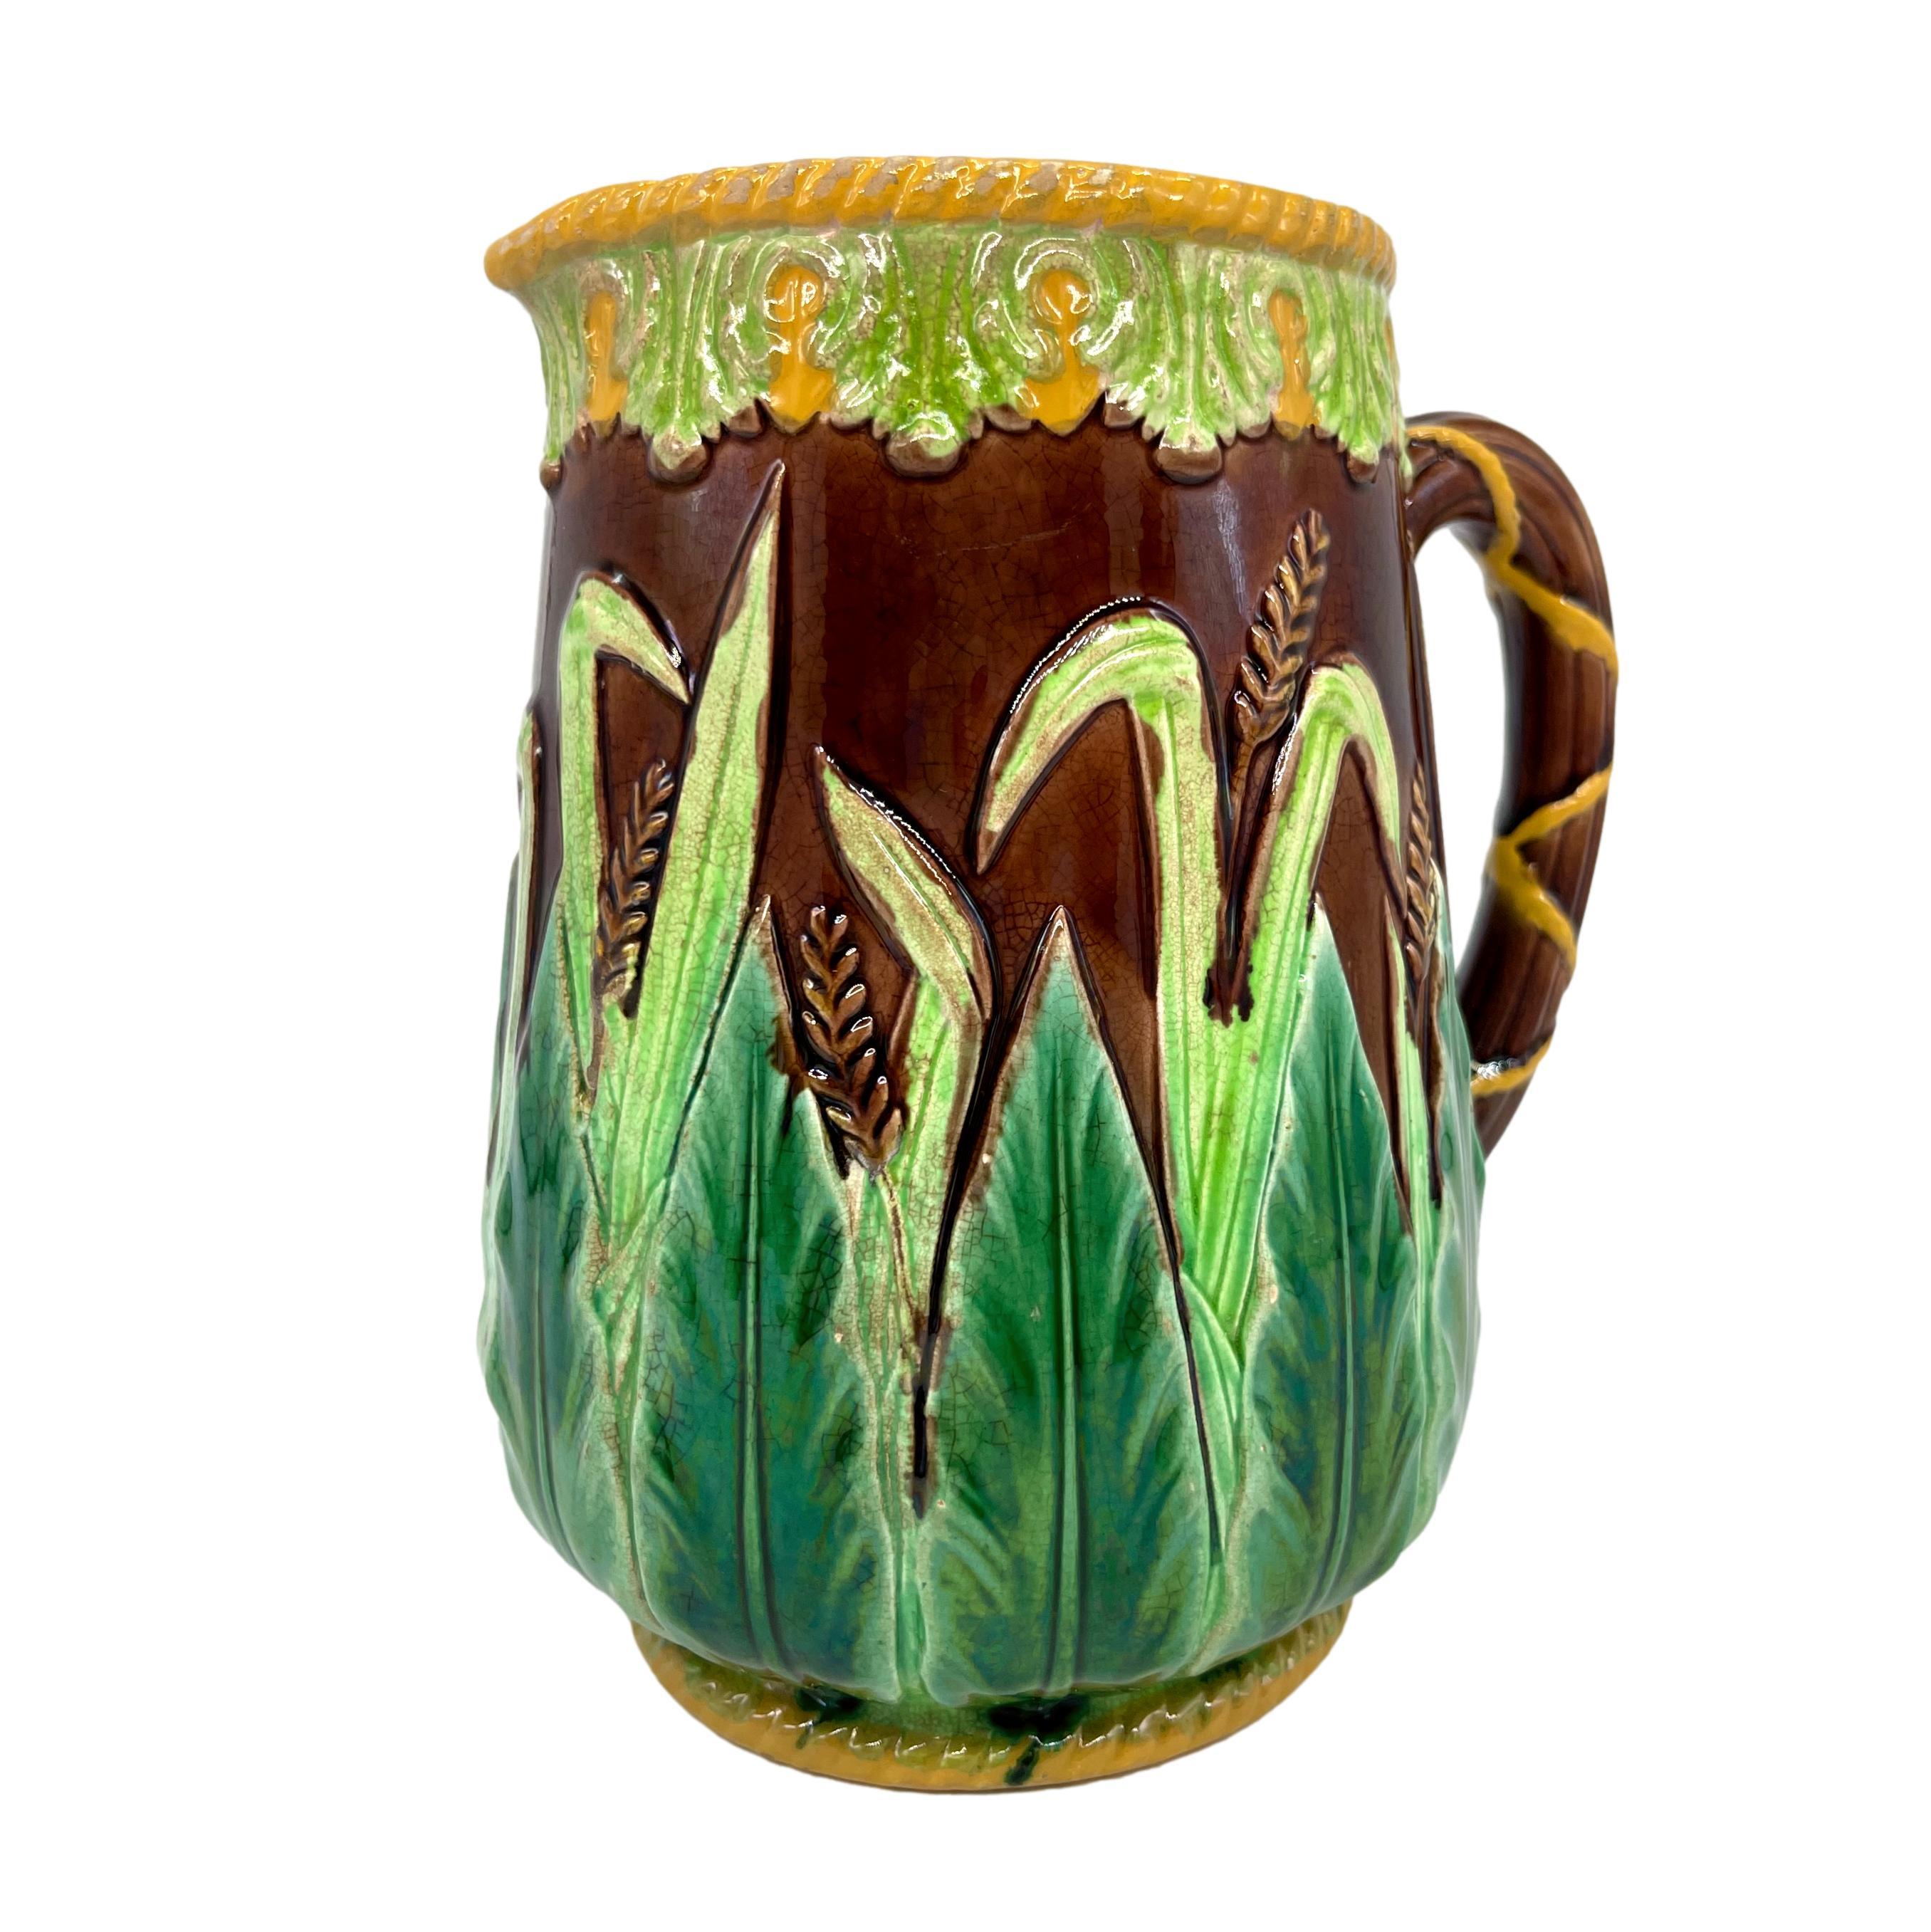 Victorian George Jones Majolica Wheat Pitcher with Green Acanthus Leaves, Ca. 1875 For Sale